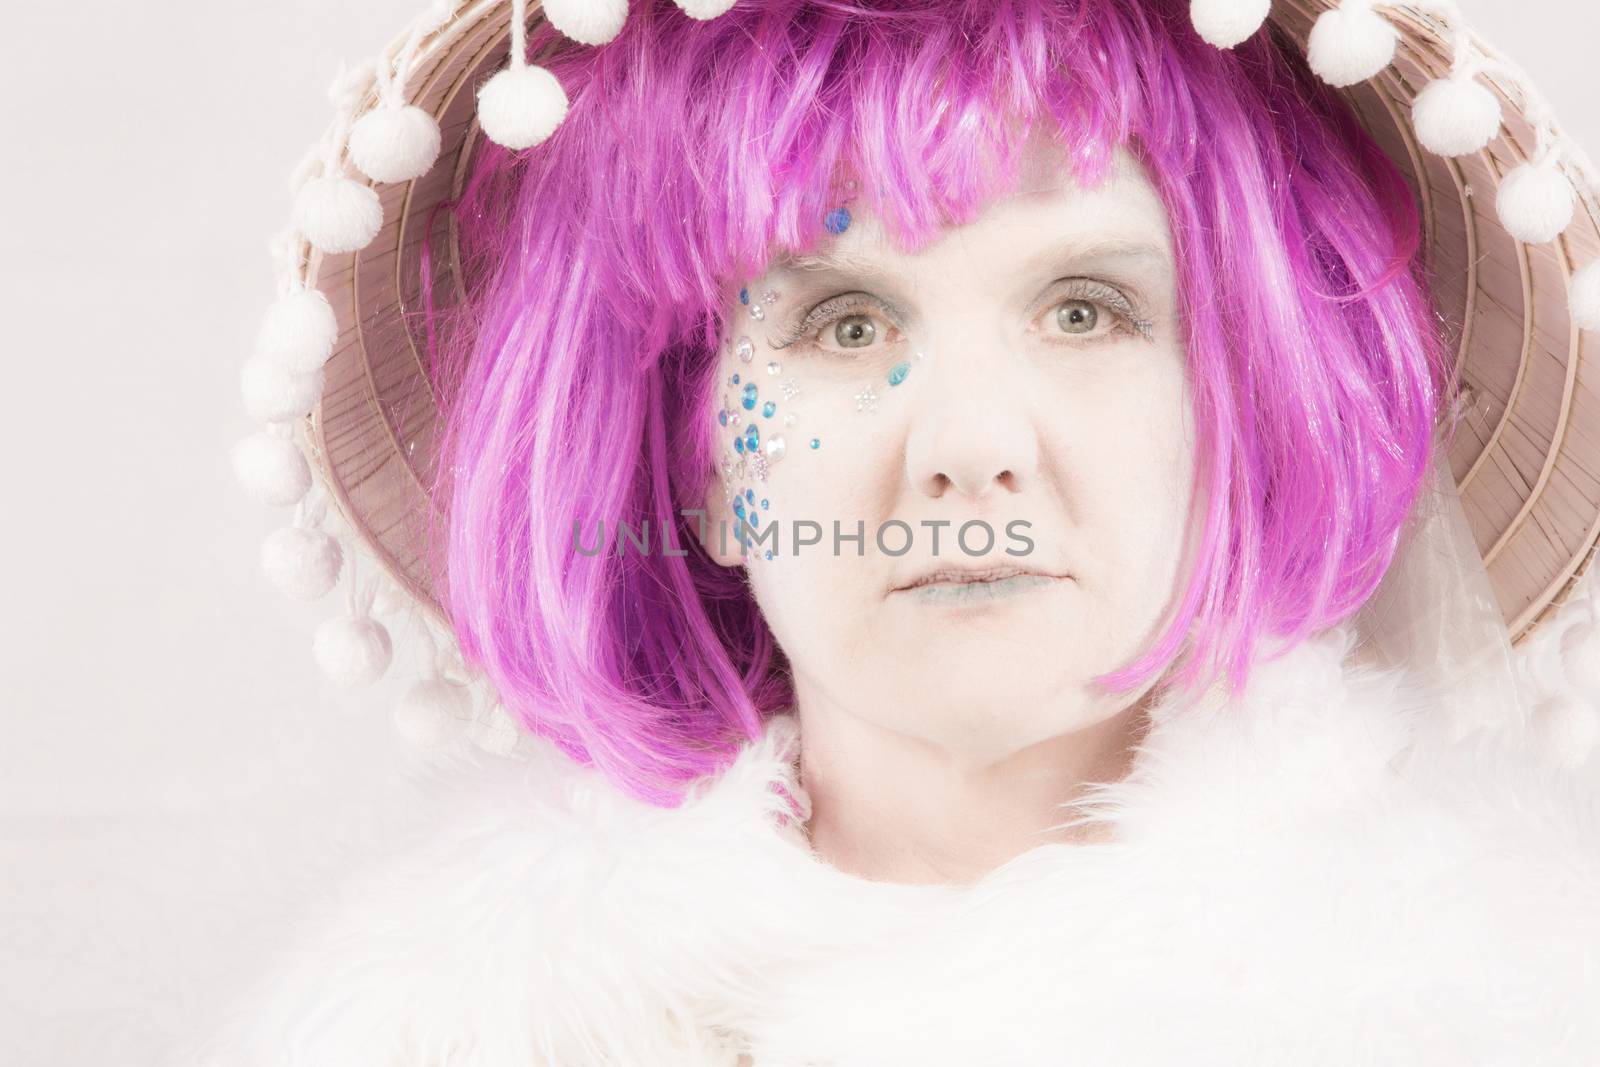 Ethereal female circus style character on white background